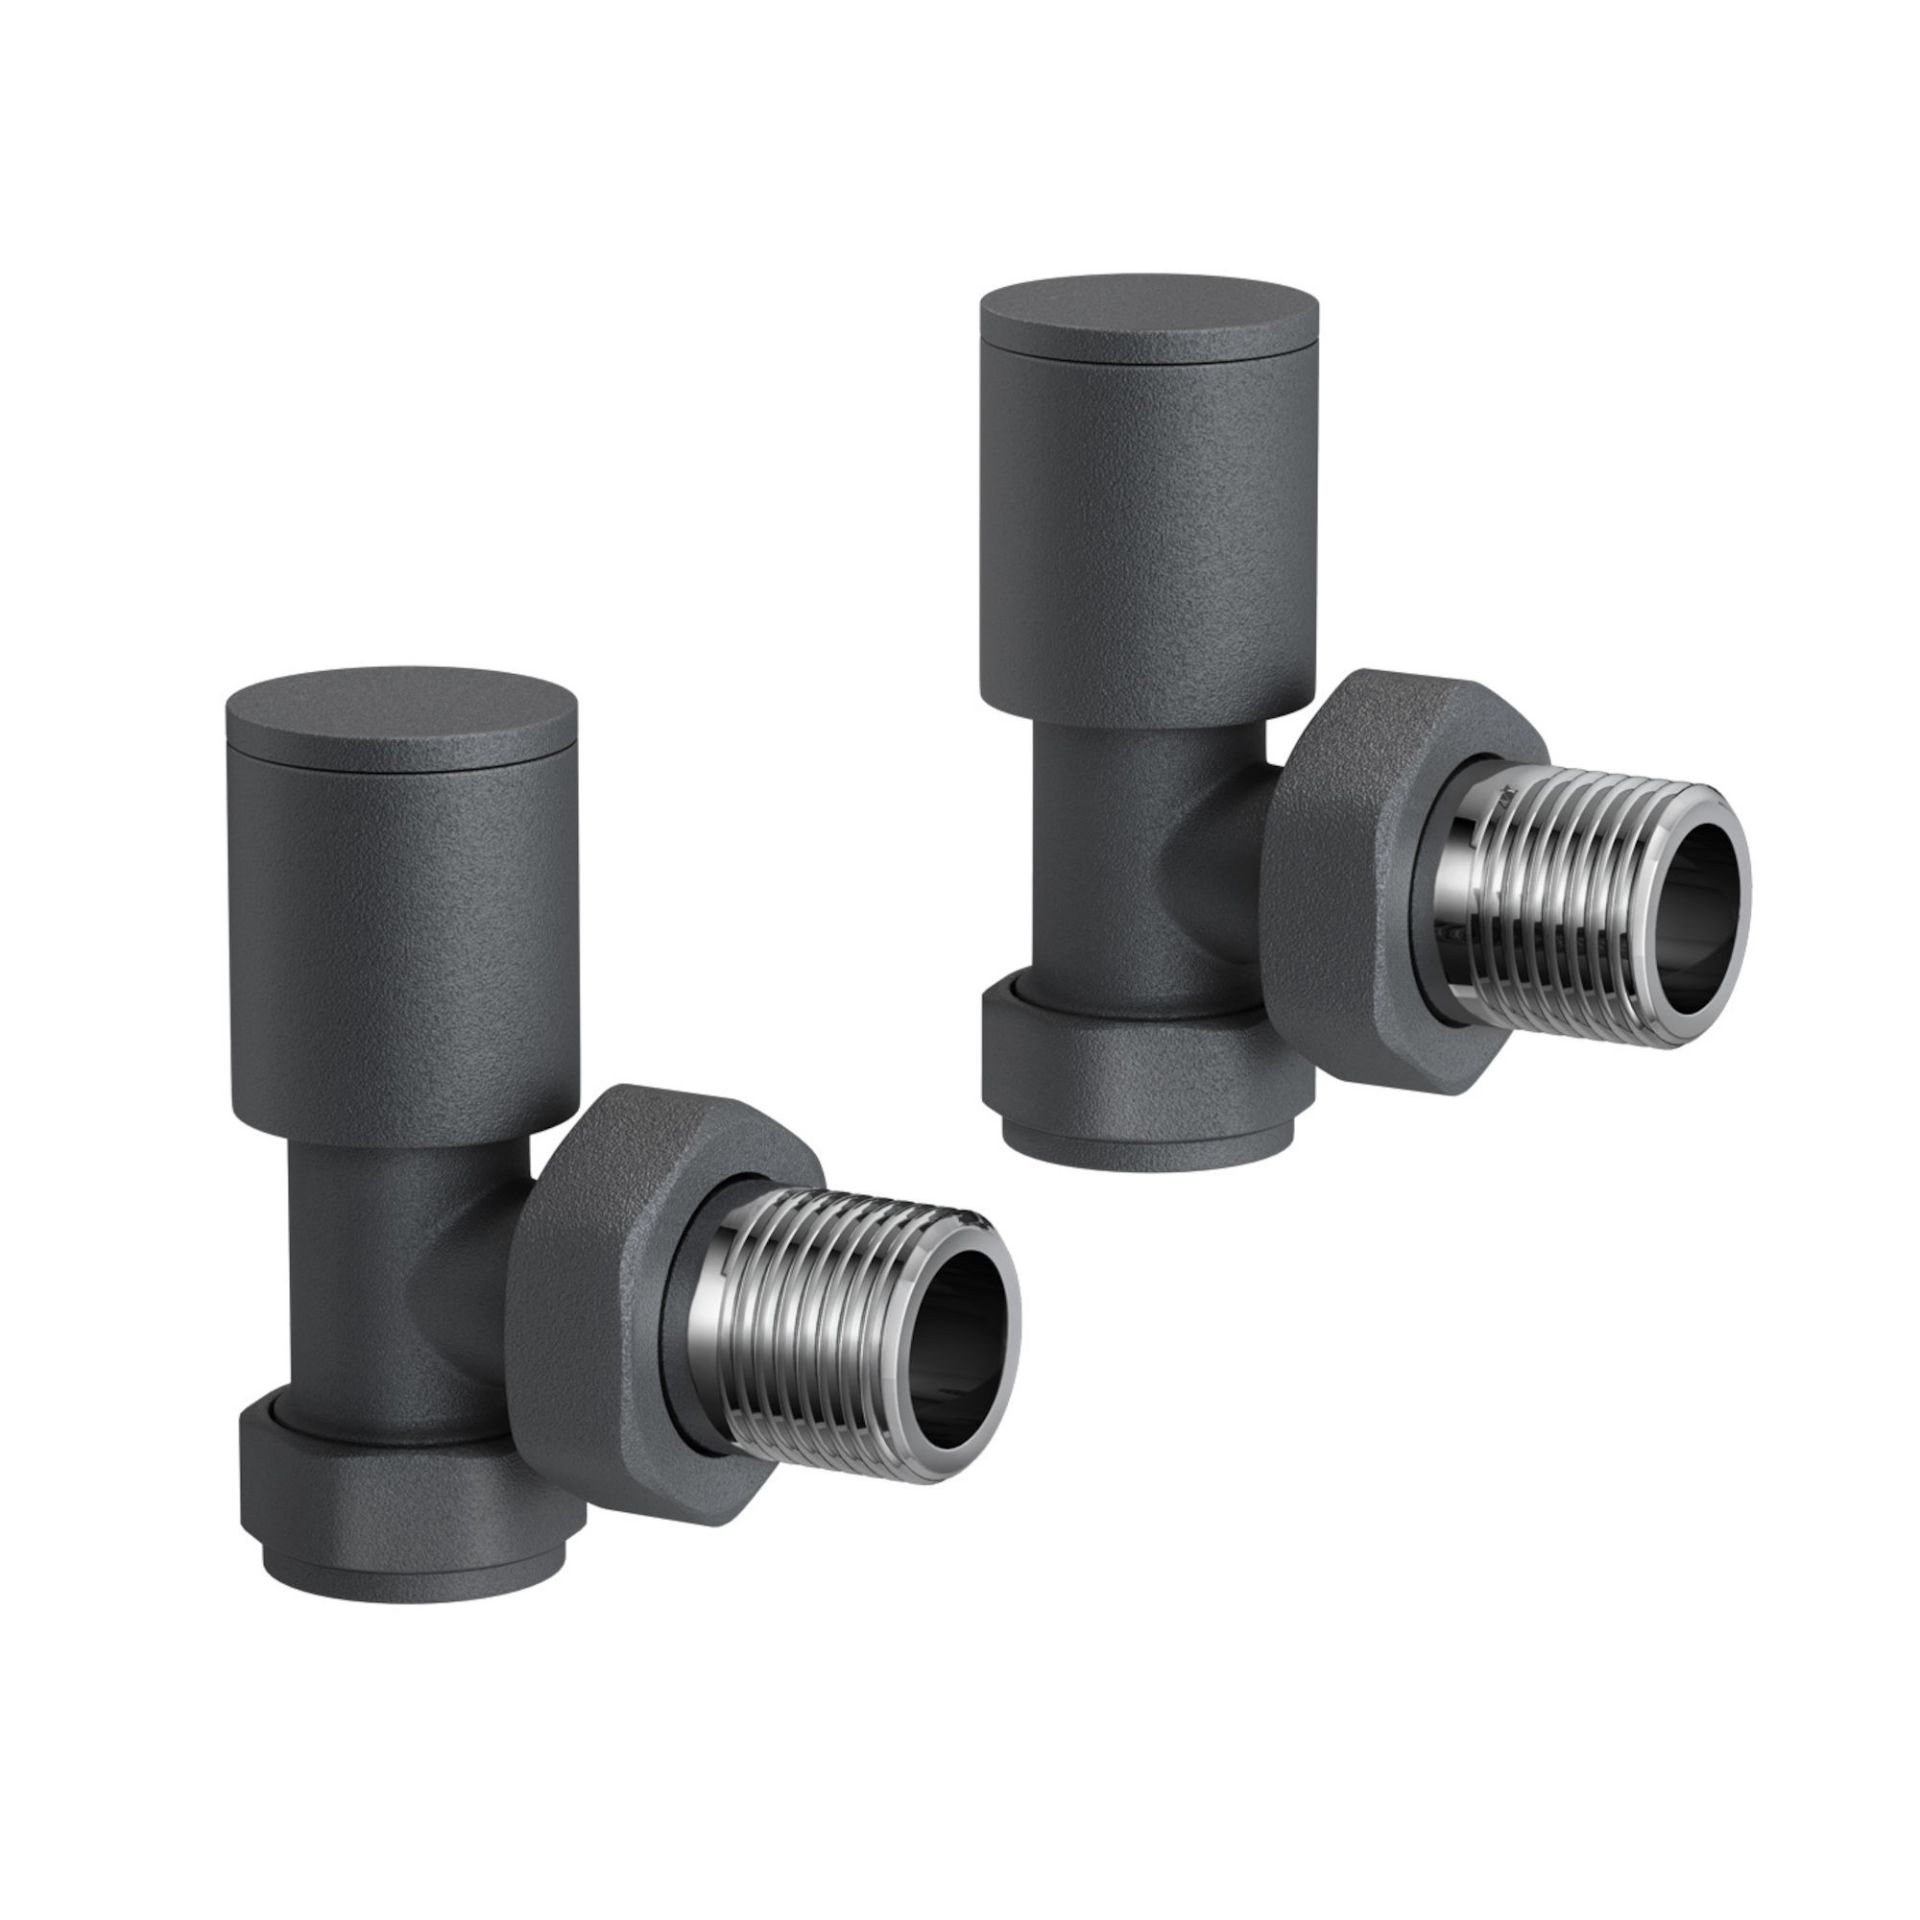 (W47) Anthracite Standard Connection Angled Radiator Valves 15mm Contemporary anthracite finish